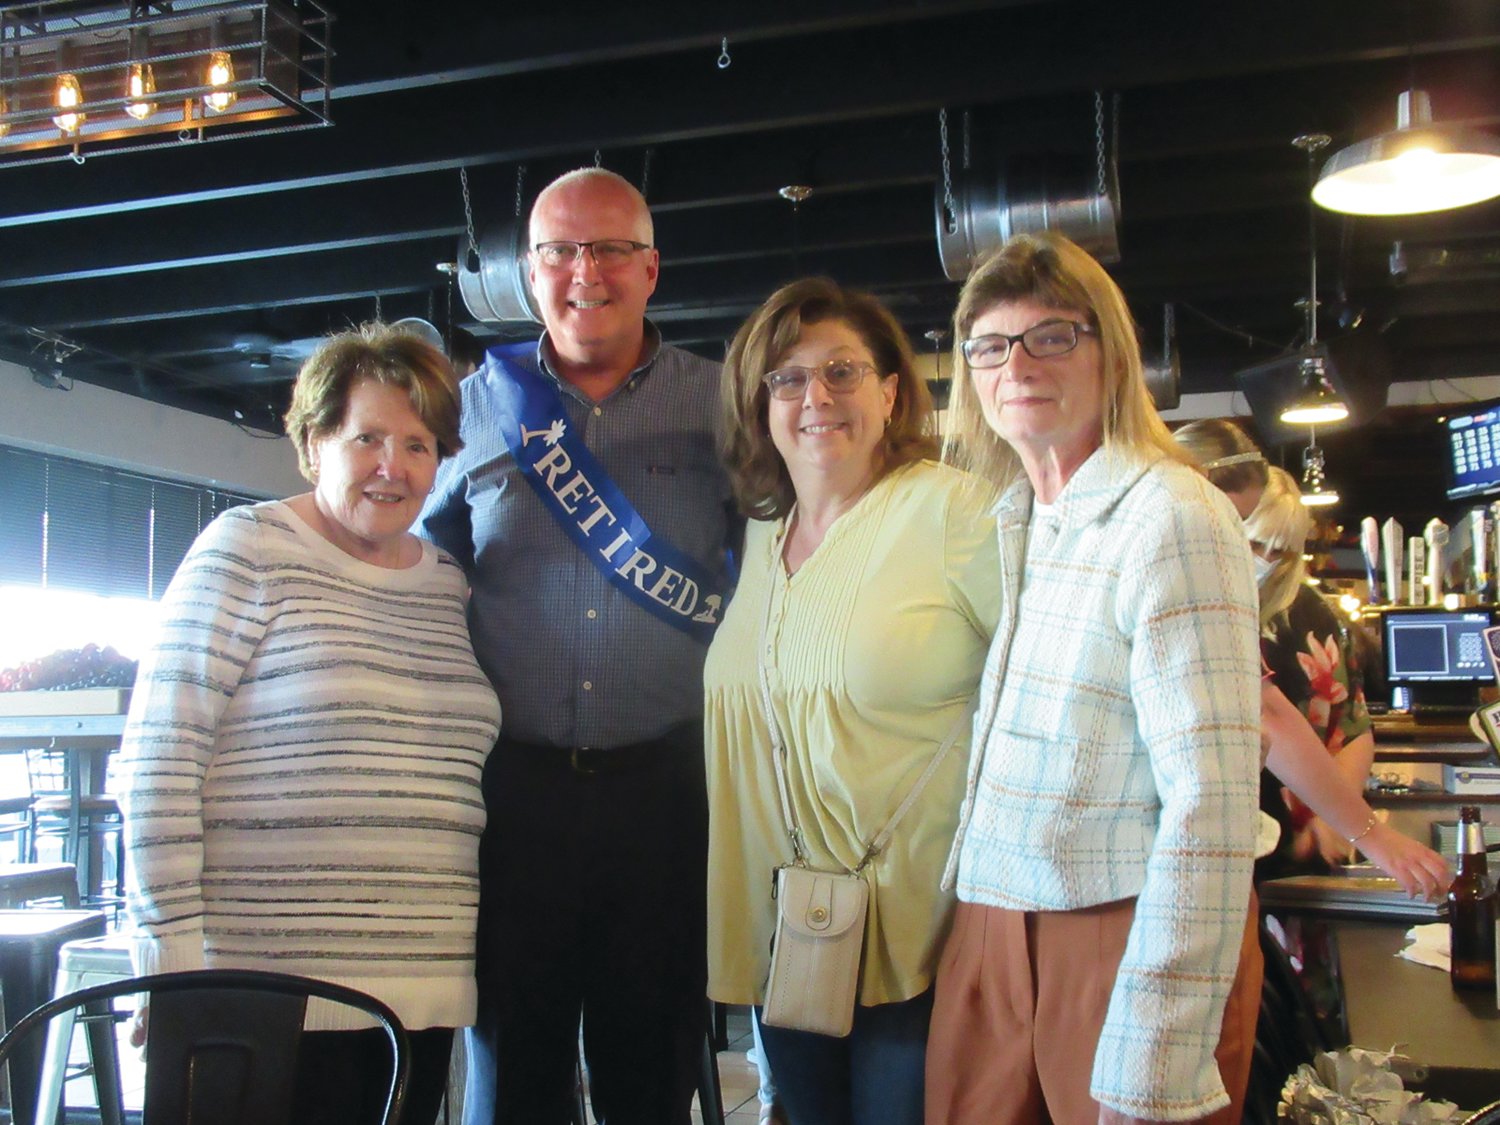 STAFF SENDOFF: Among the many people who helped make Dave Cournoyer’s special retirement sendoff special were Martha Taylor, previous employee and one-time School Committee Secretary; Angela Brasil, administrative assistant to Dr. DiLullo and School Committee Member MarySue Andreozzi.